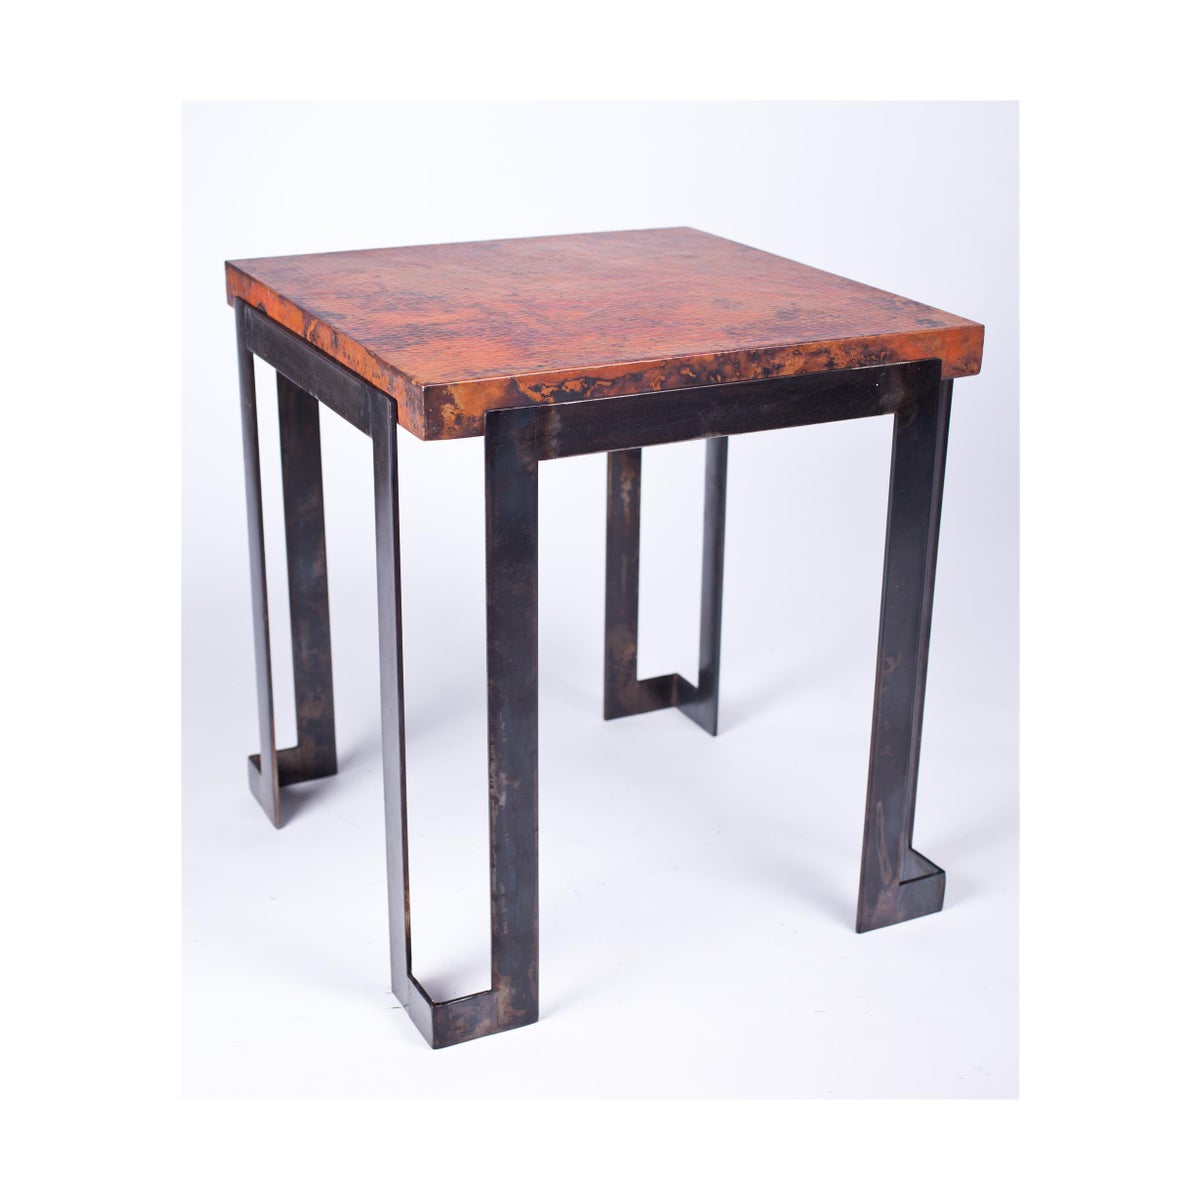 Steel Strap End Table with Hammered Copper Top